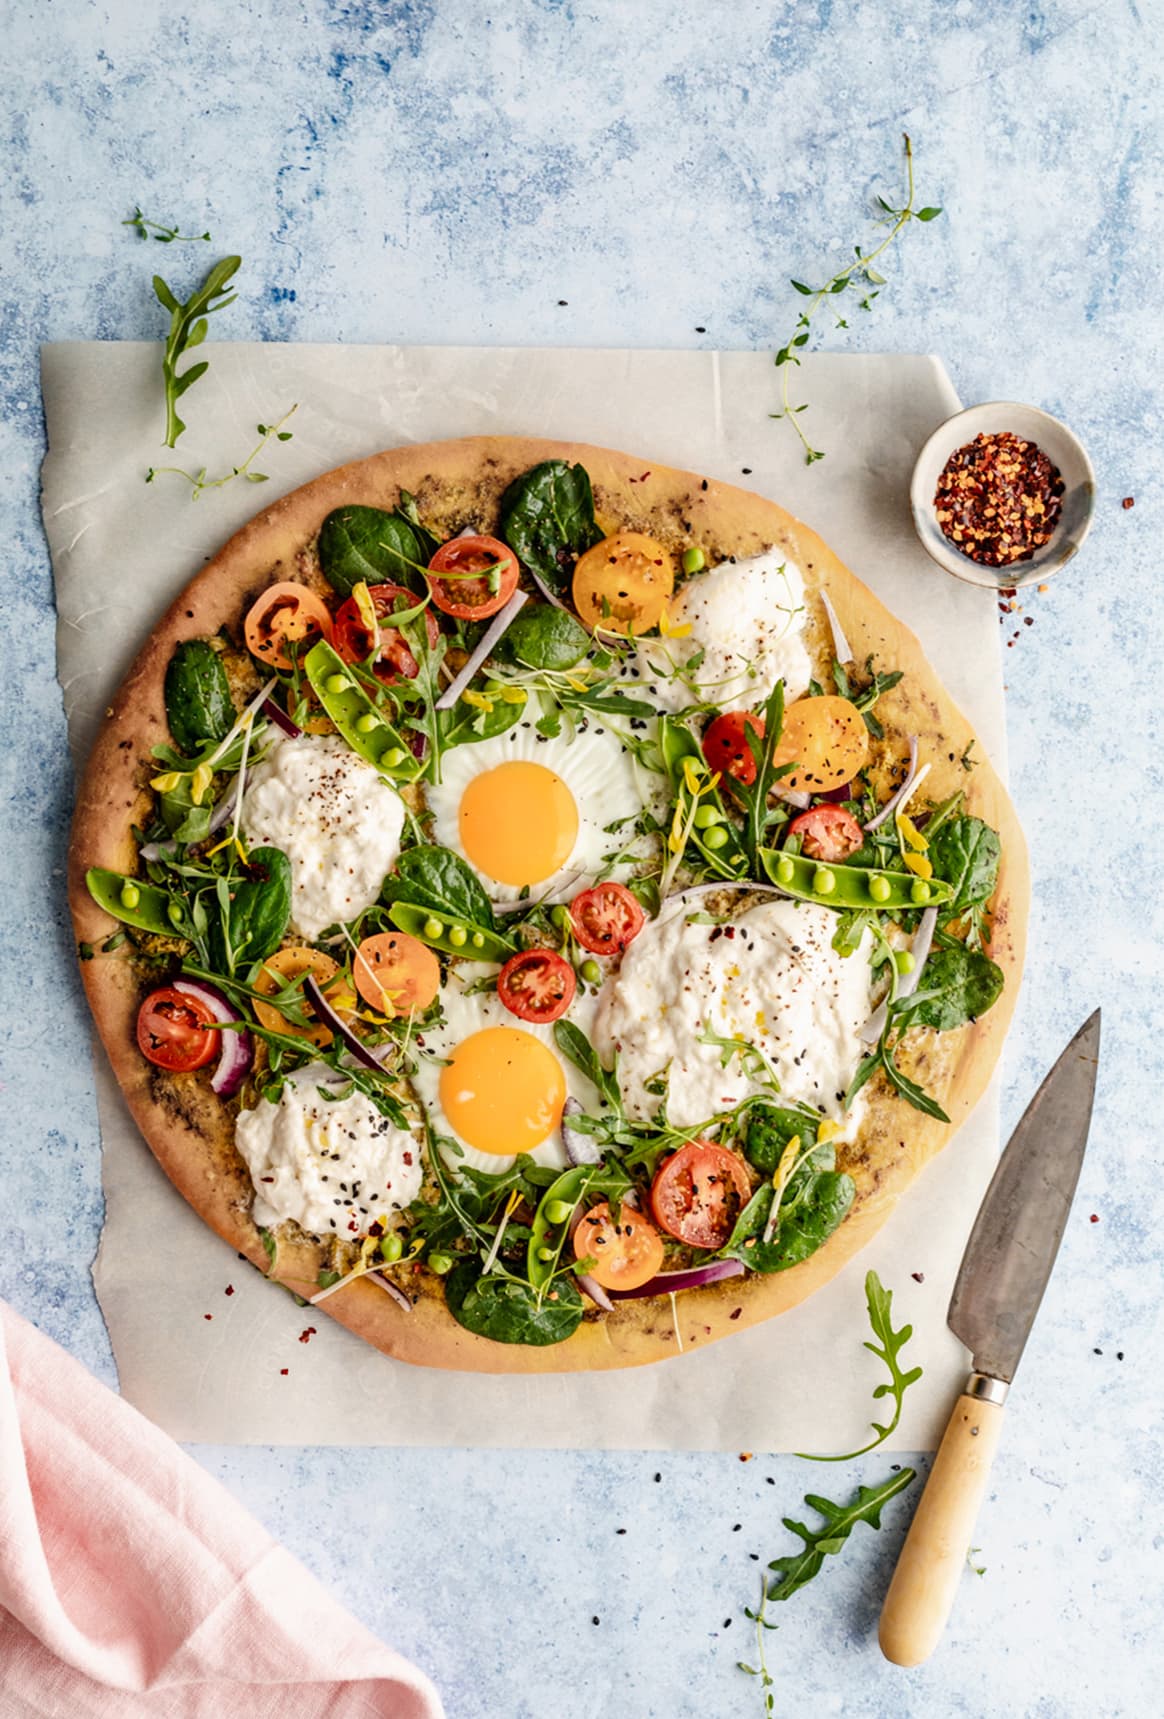 https://yogaofcooking.co/wp-content/uploads/2019/03/spring-greens-pizza-1-1.jpg